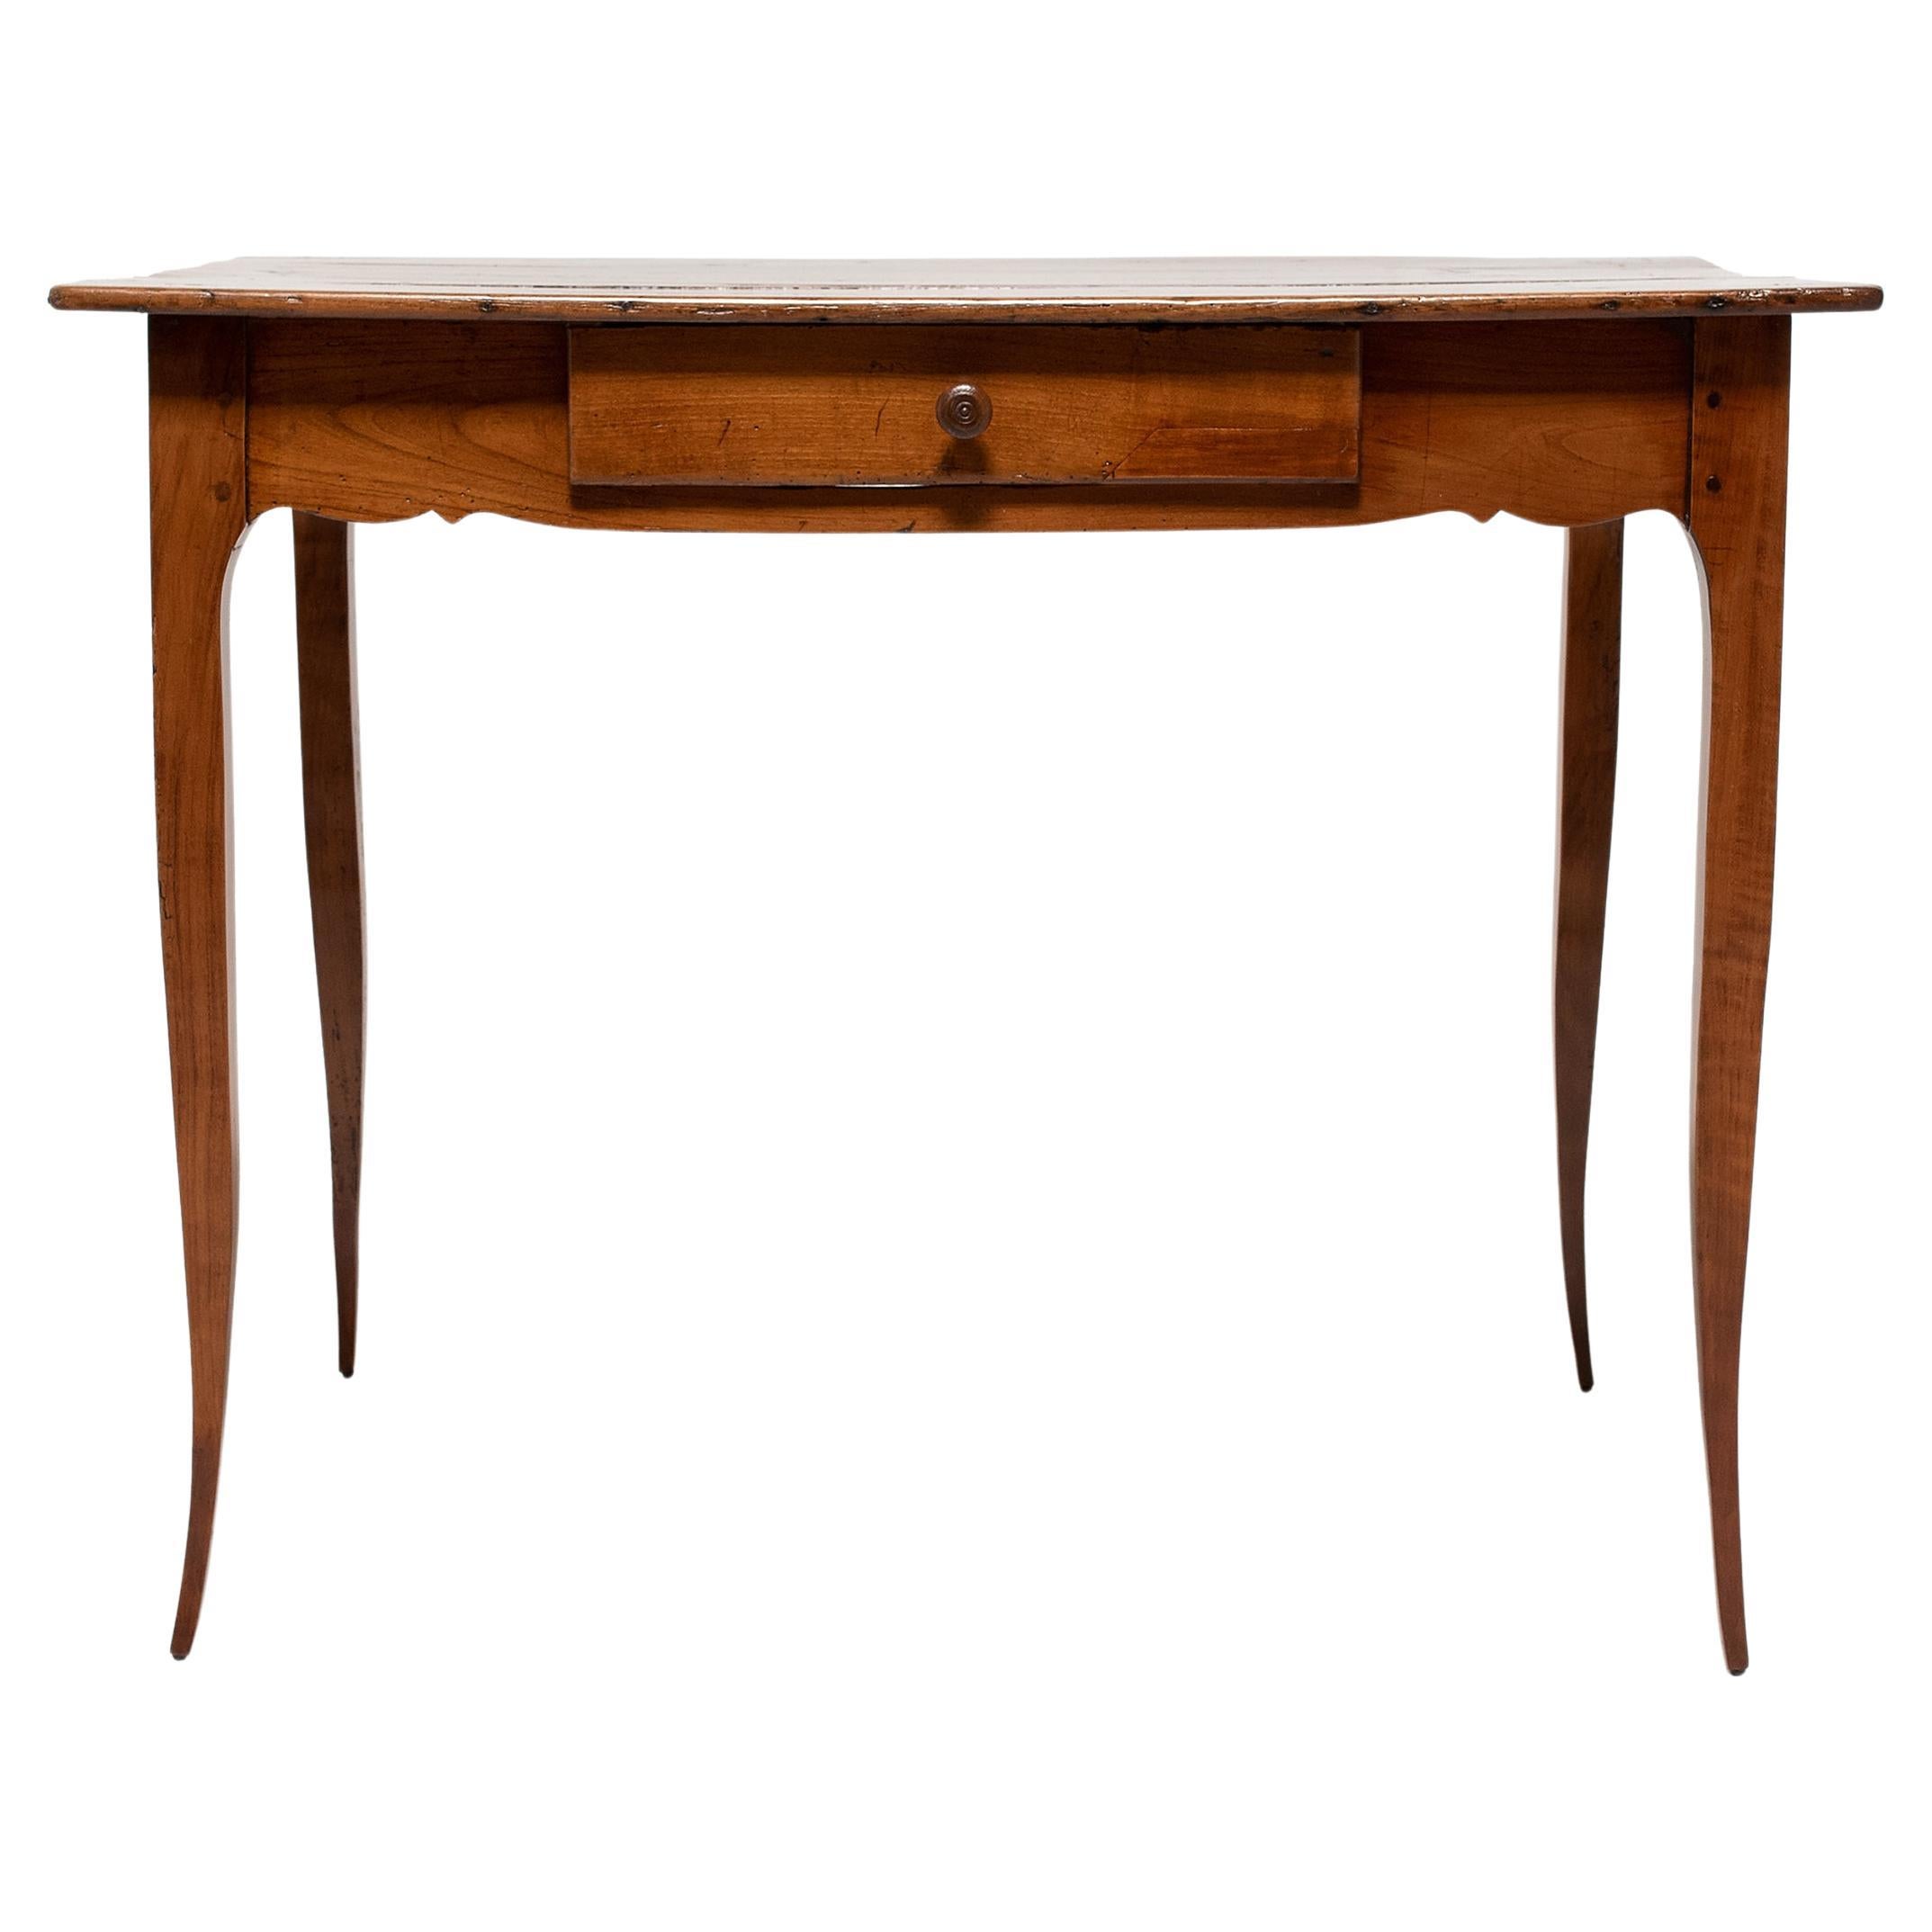 French Louis XV Center Table with Drawer, c. 1760 For Sale